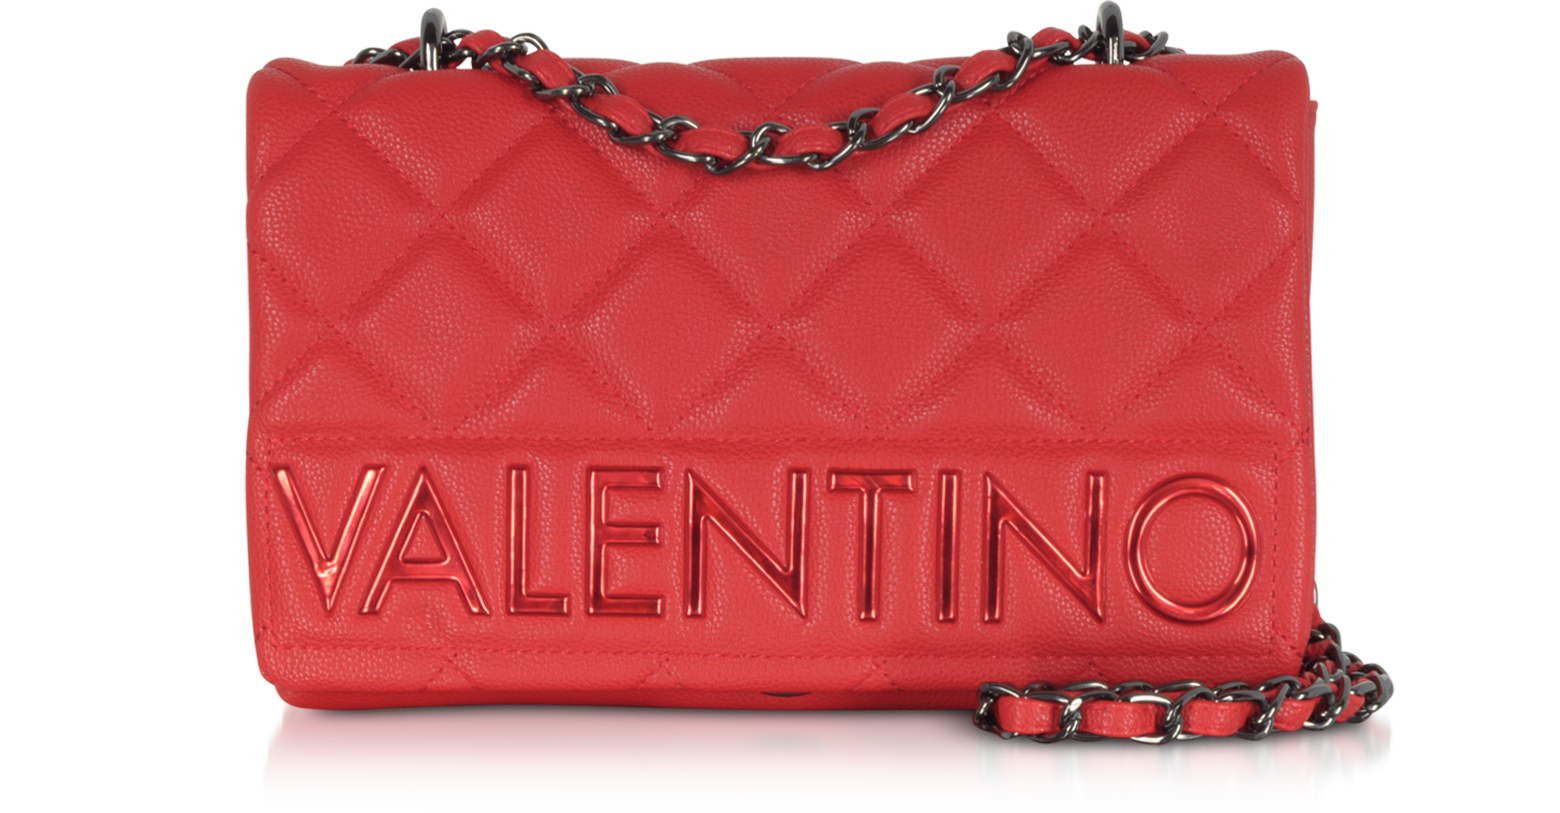 $895 NWT MARIO VALENTINO RED QUILTED LEATHER DEMI 3 in 1 SHOULDER BAG  CROSSBODY